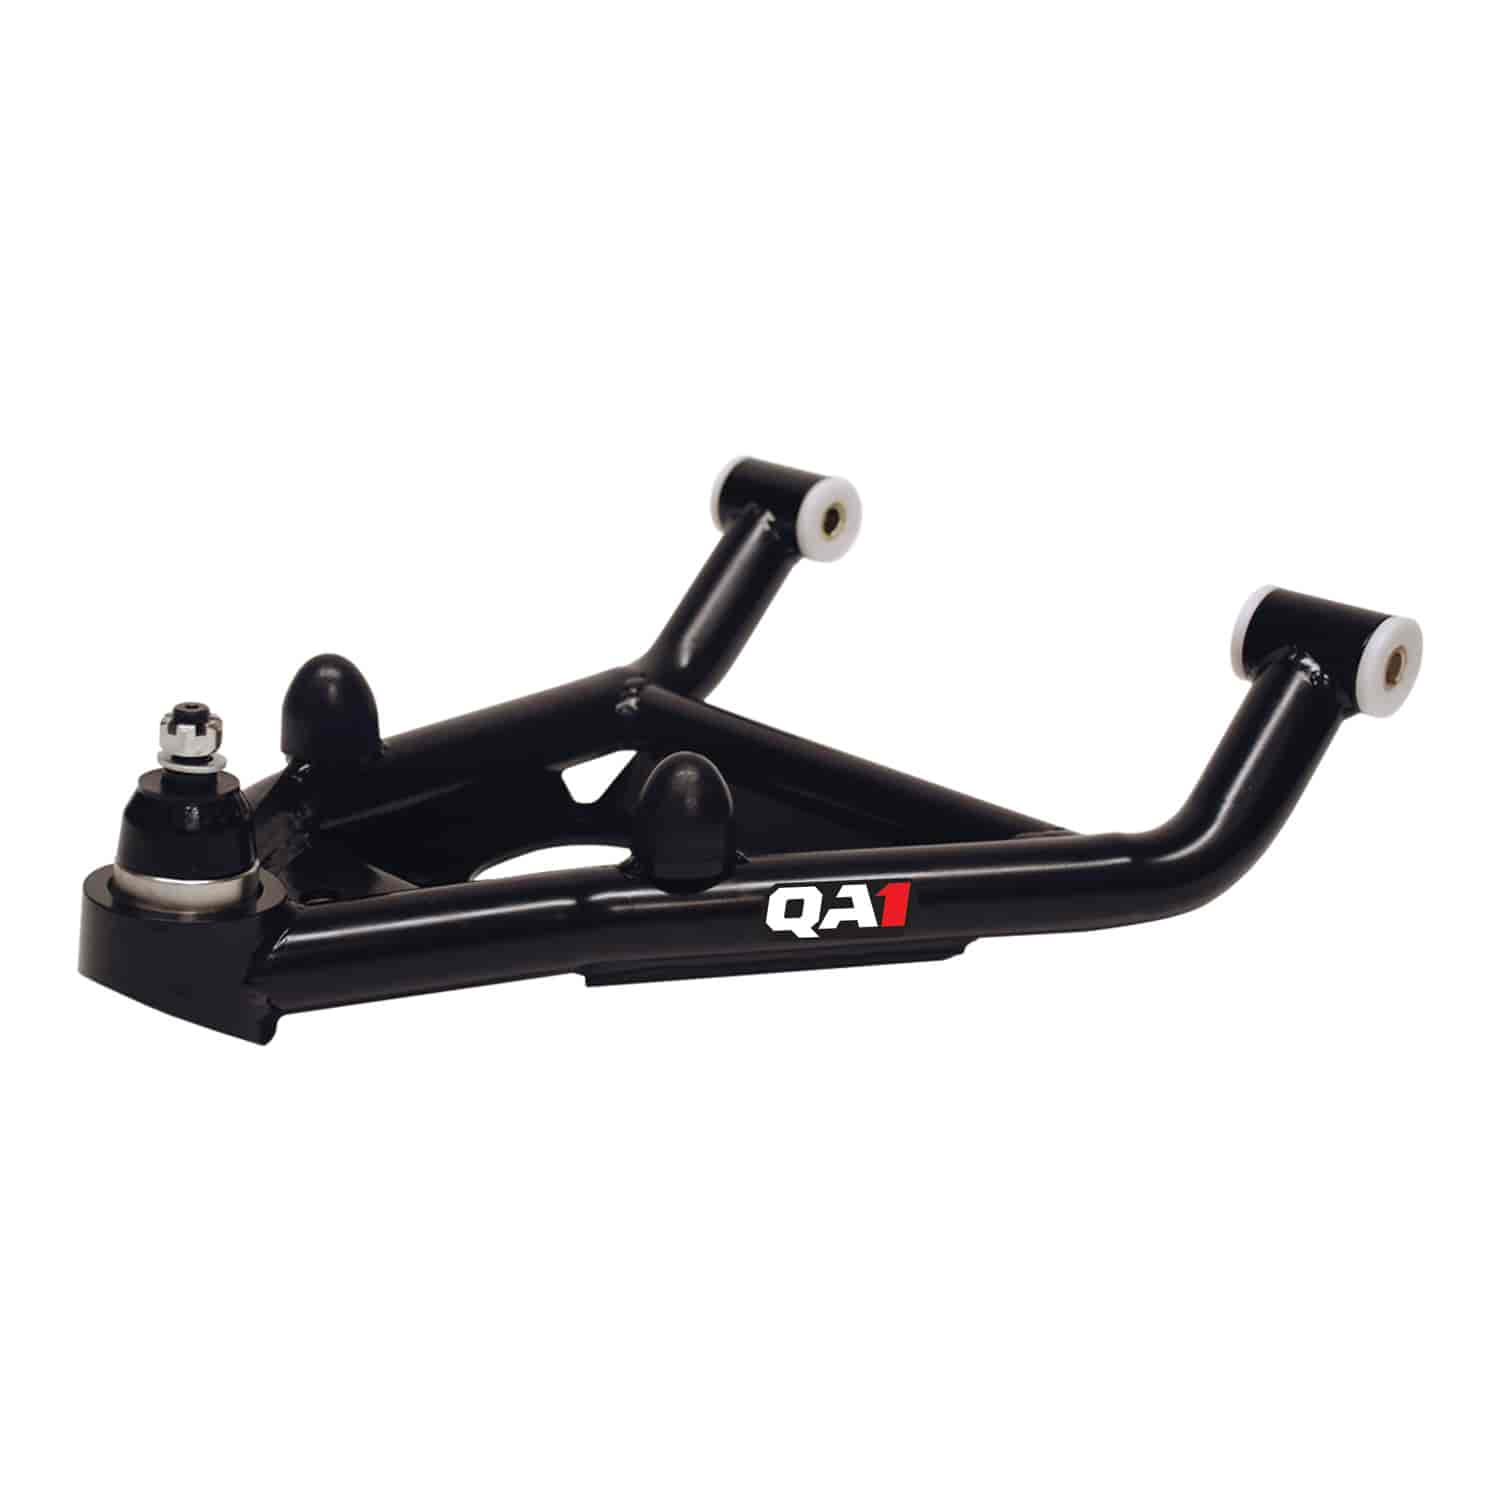 Race Lower Control Arms for 1967-1969 GM F-Body